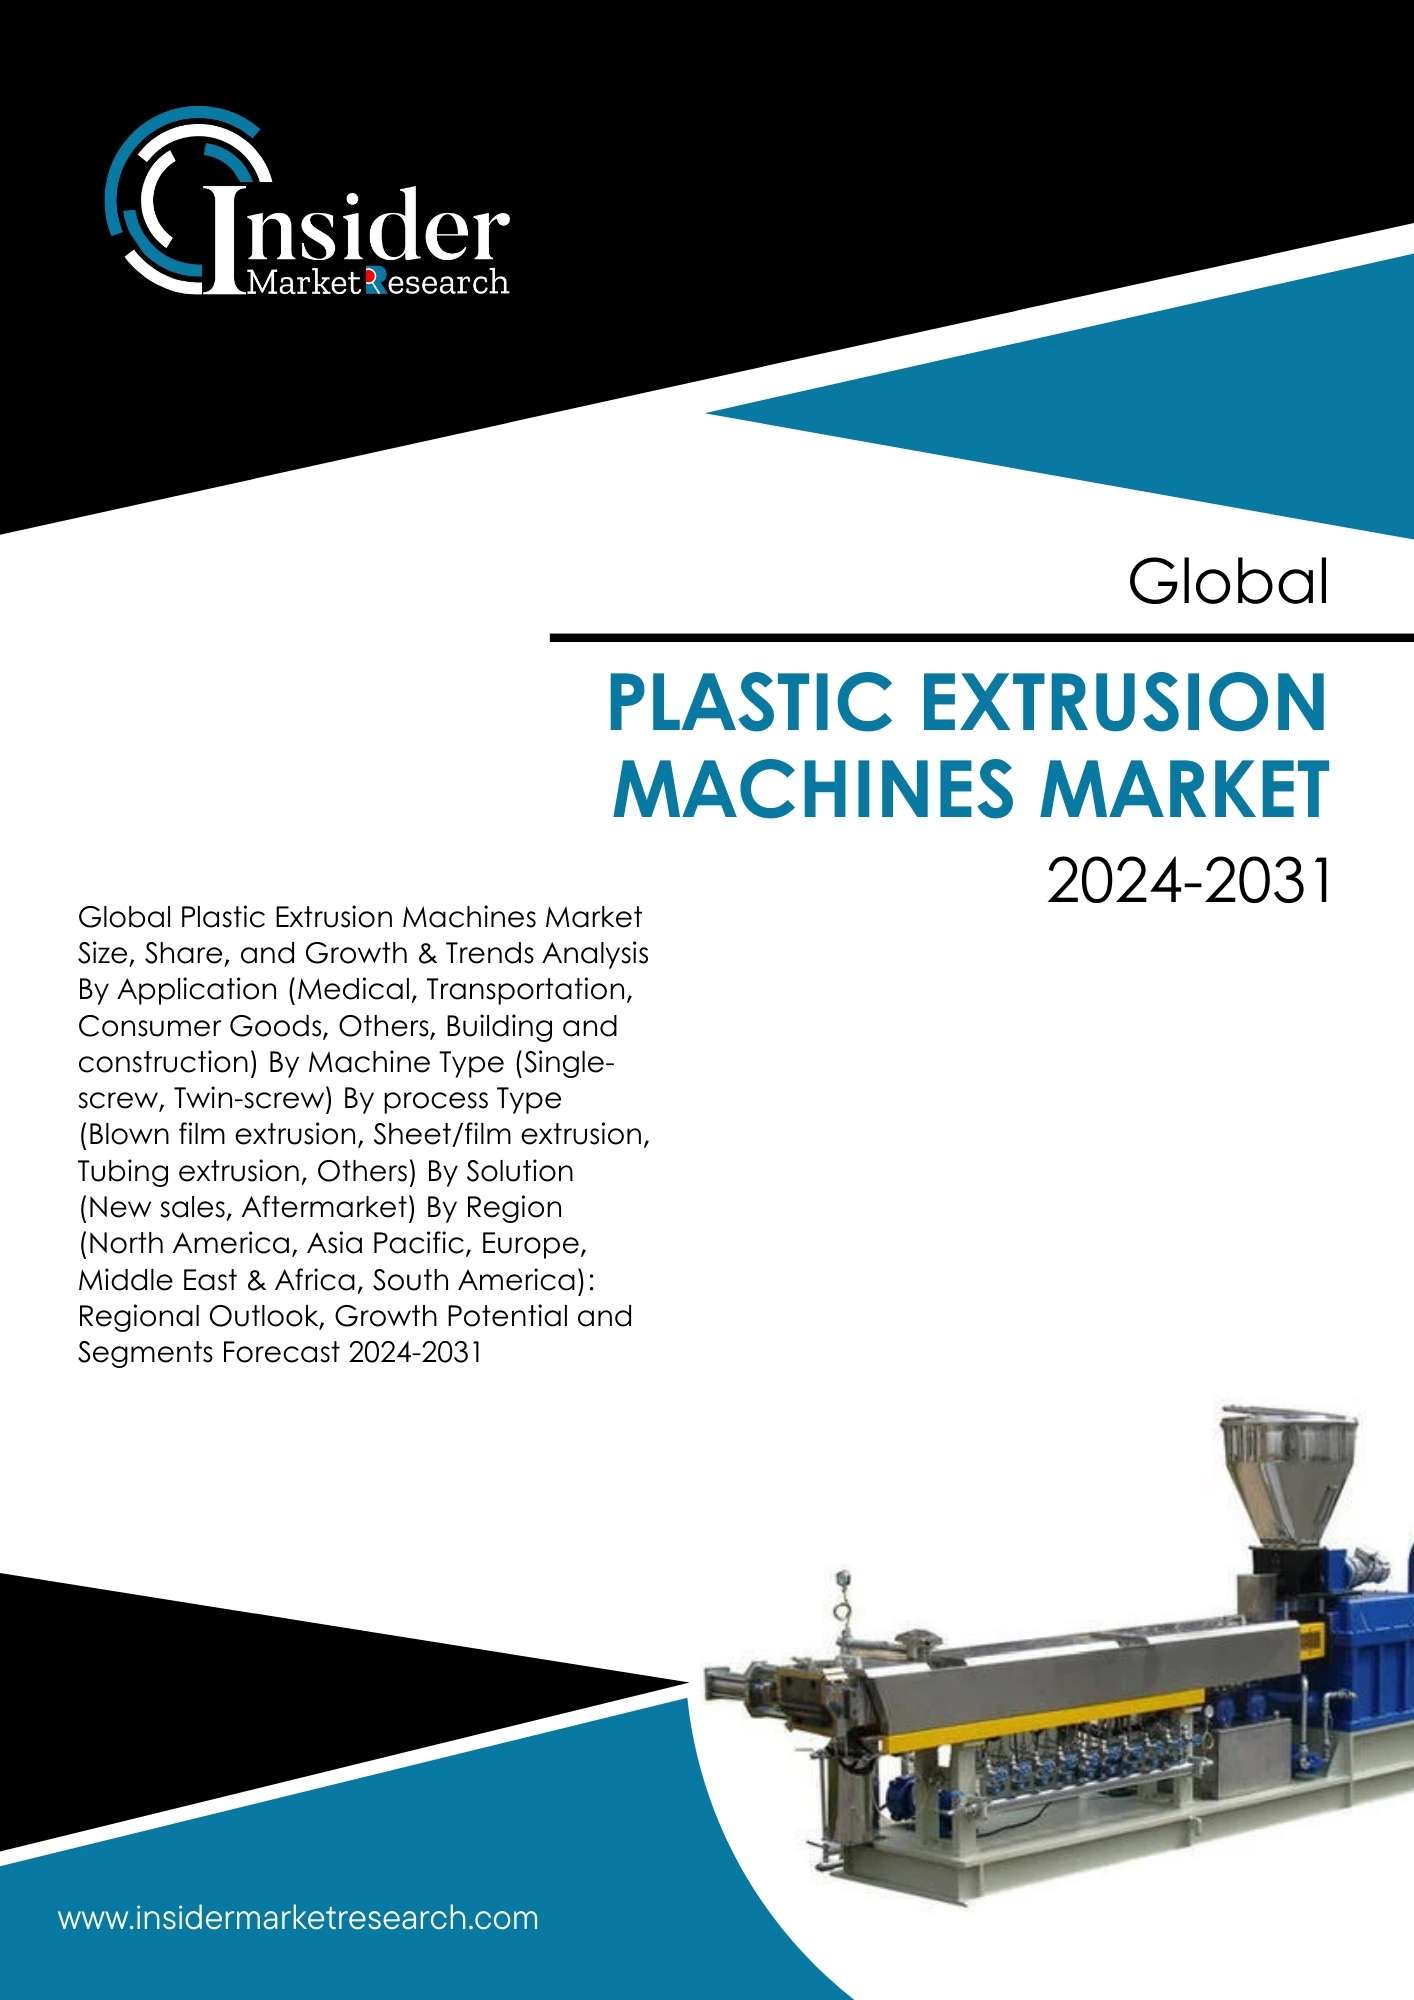 Plastic Extrusion Machines Market Global Industry Analysis and Forecast to 2031 | Insider Market Research